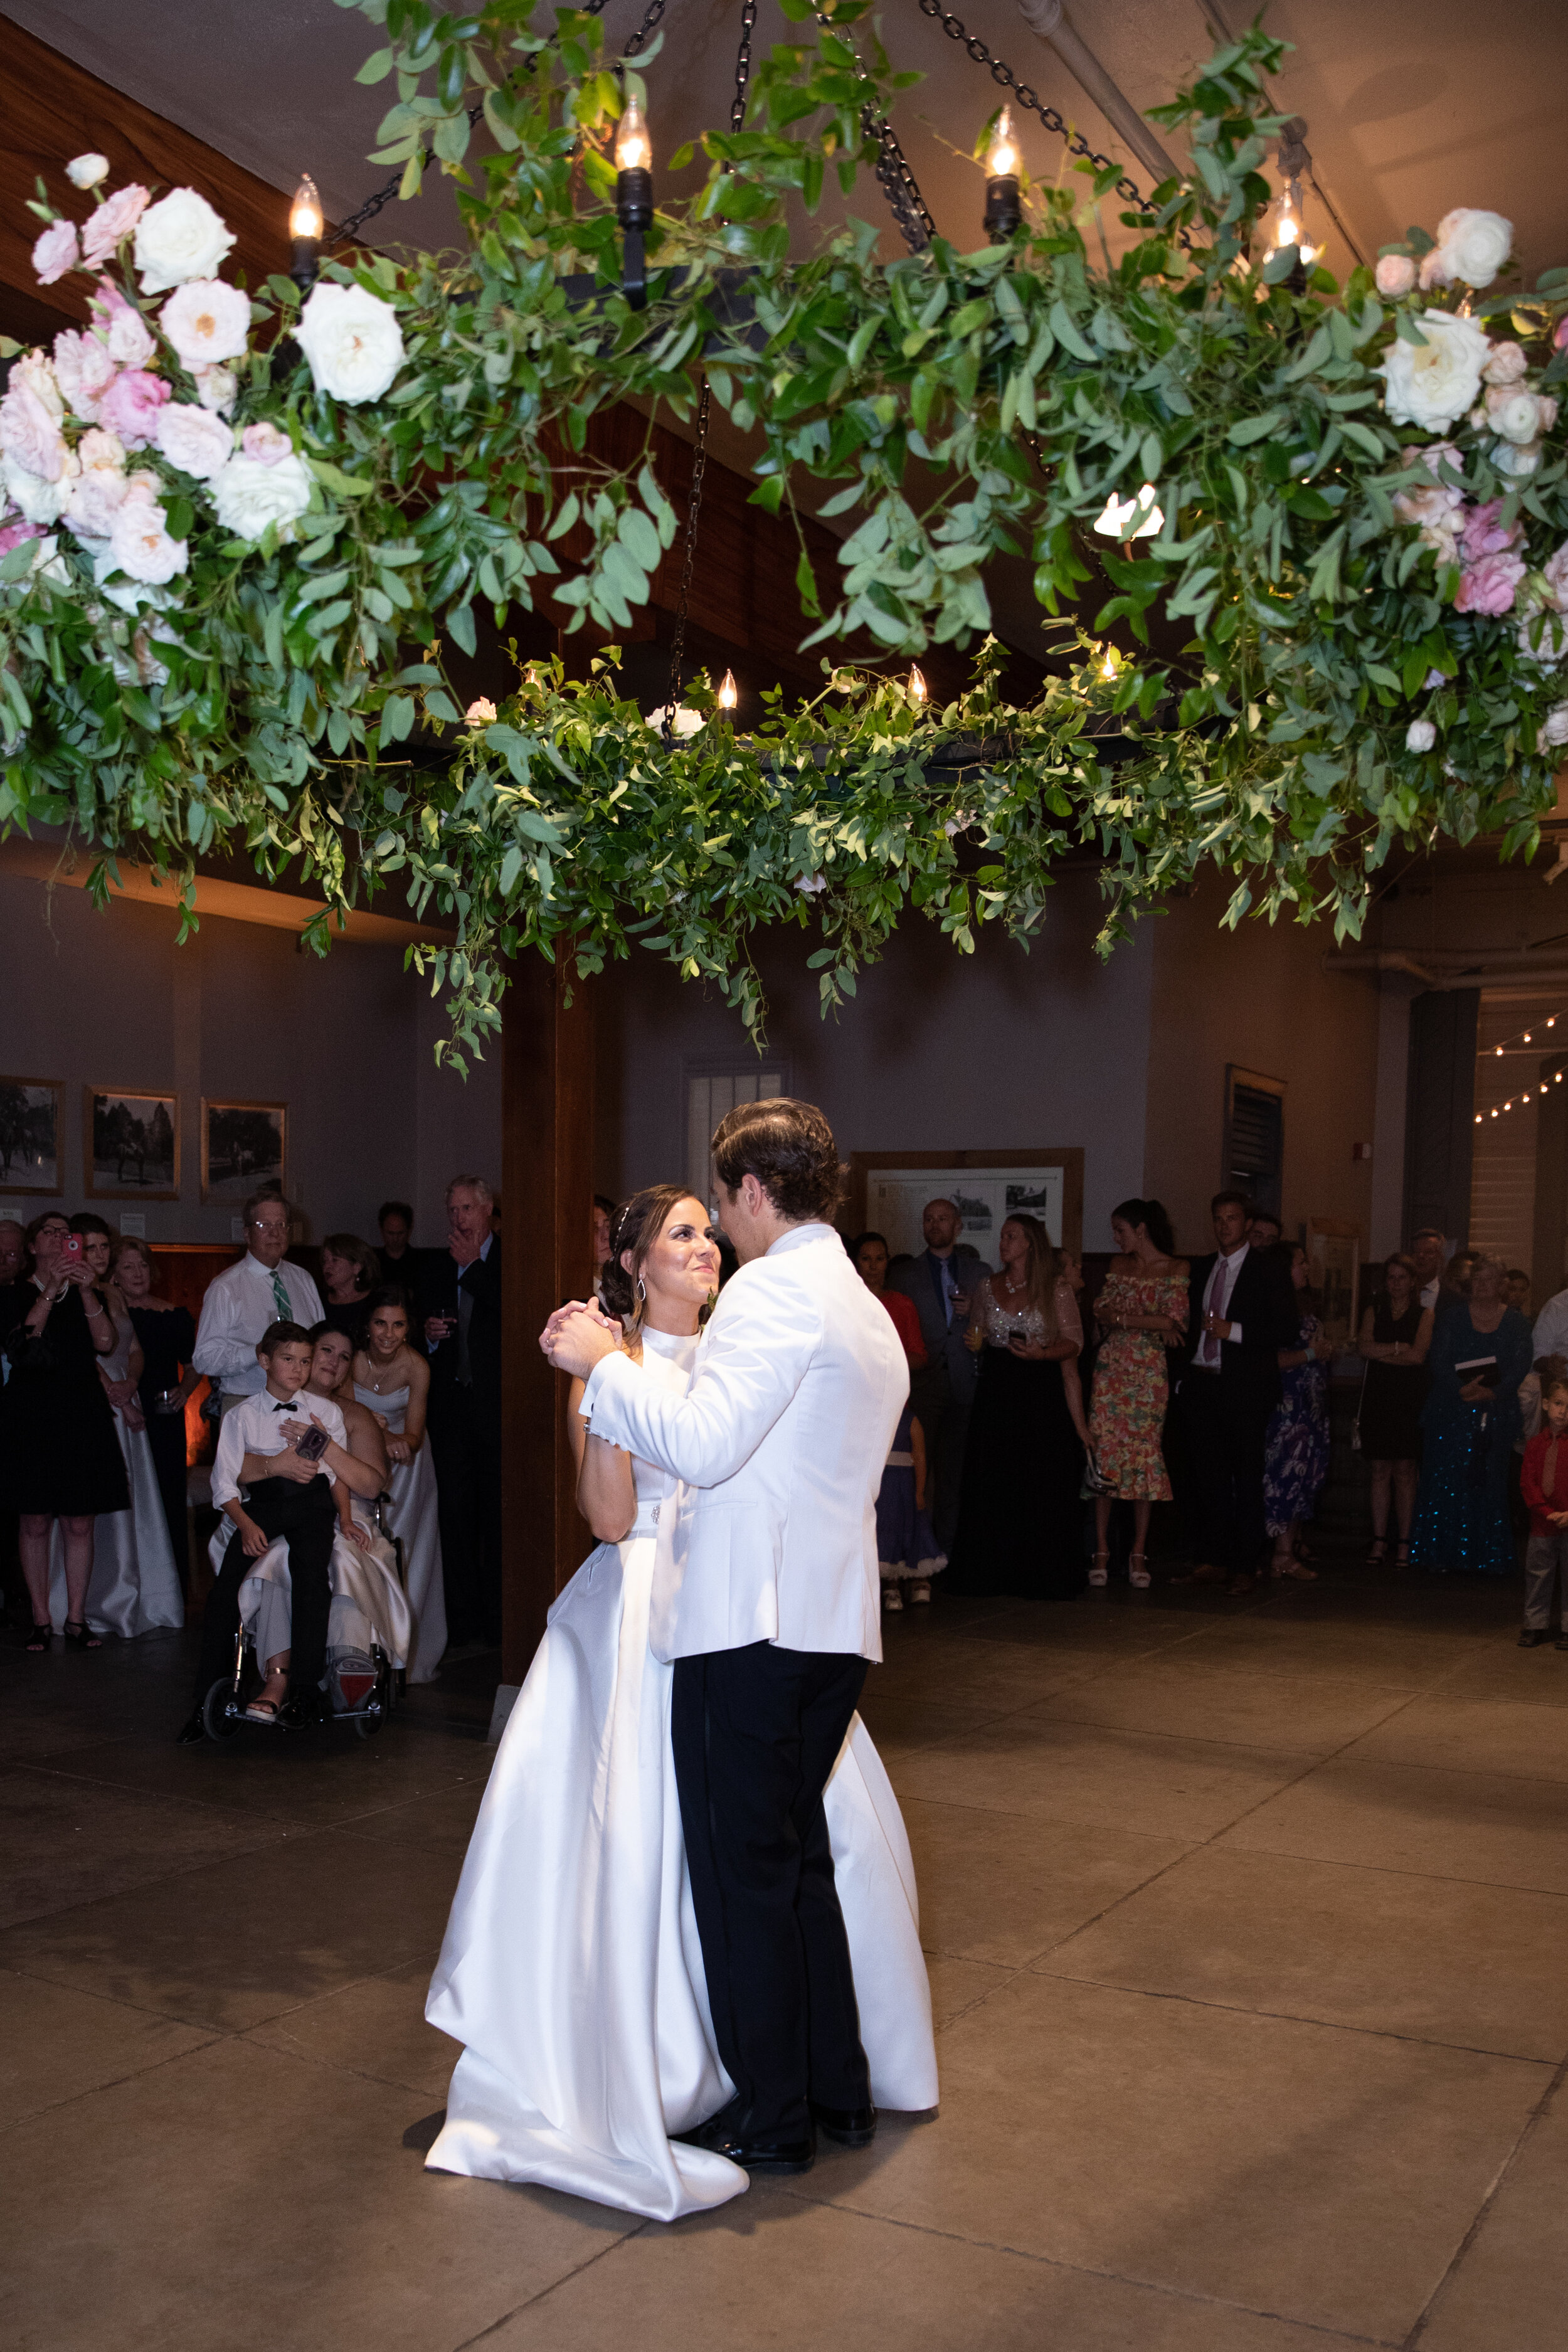 Oversized floral wreath installation over the dance floor with lush vines and greenery with blush and white flowers. Nashville event and wedding florist at Belle Meade Plantation.